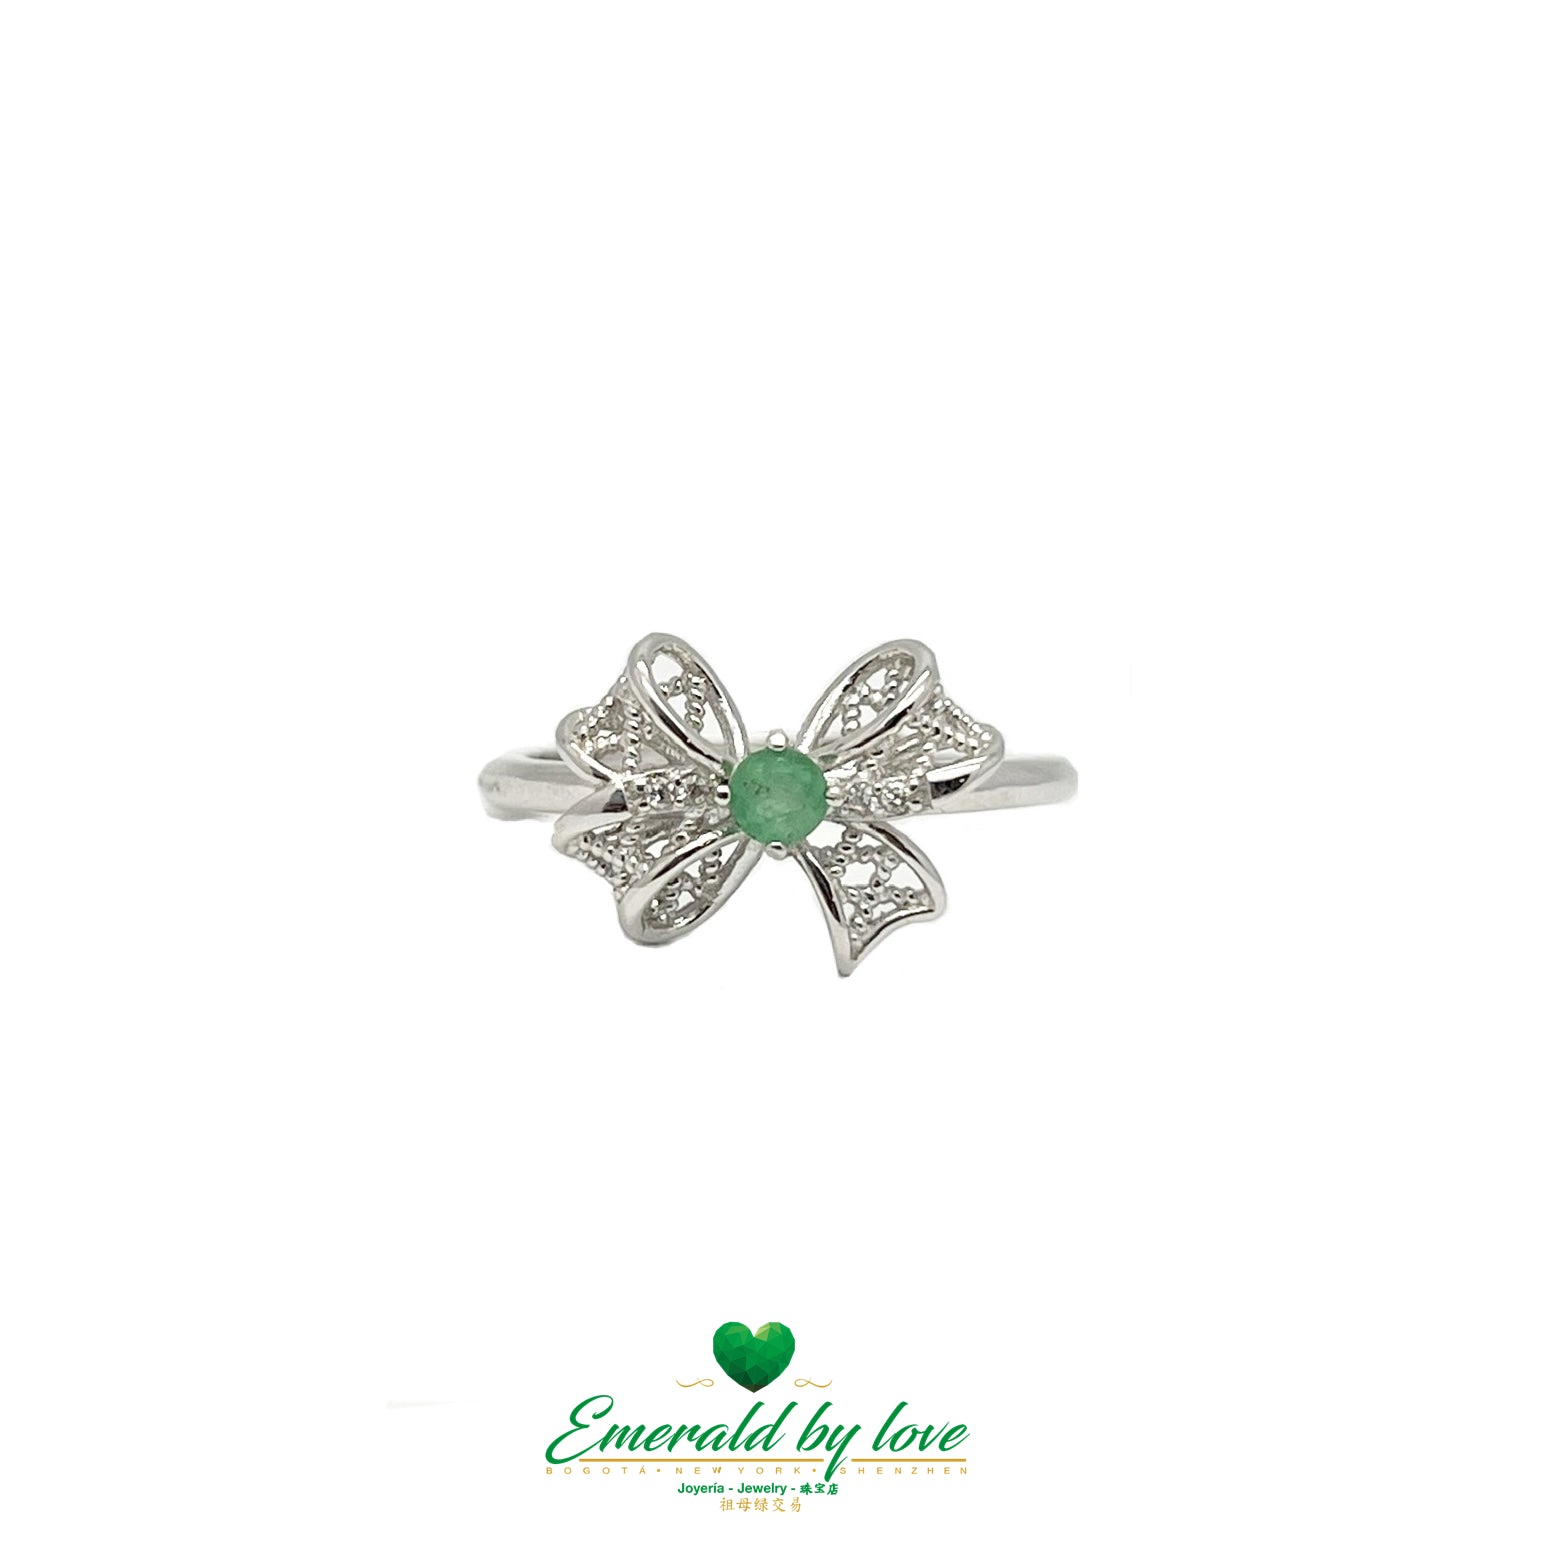 Round Central Emerald Ring with Bow Design